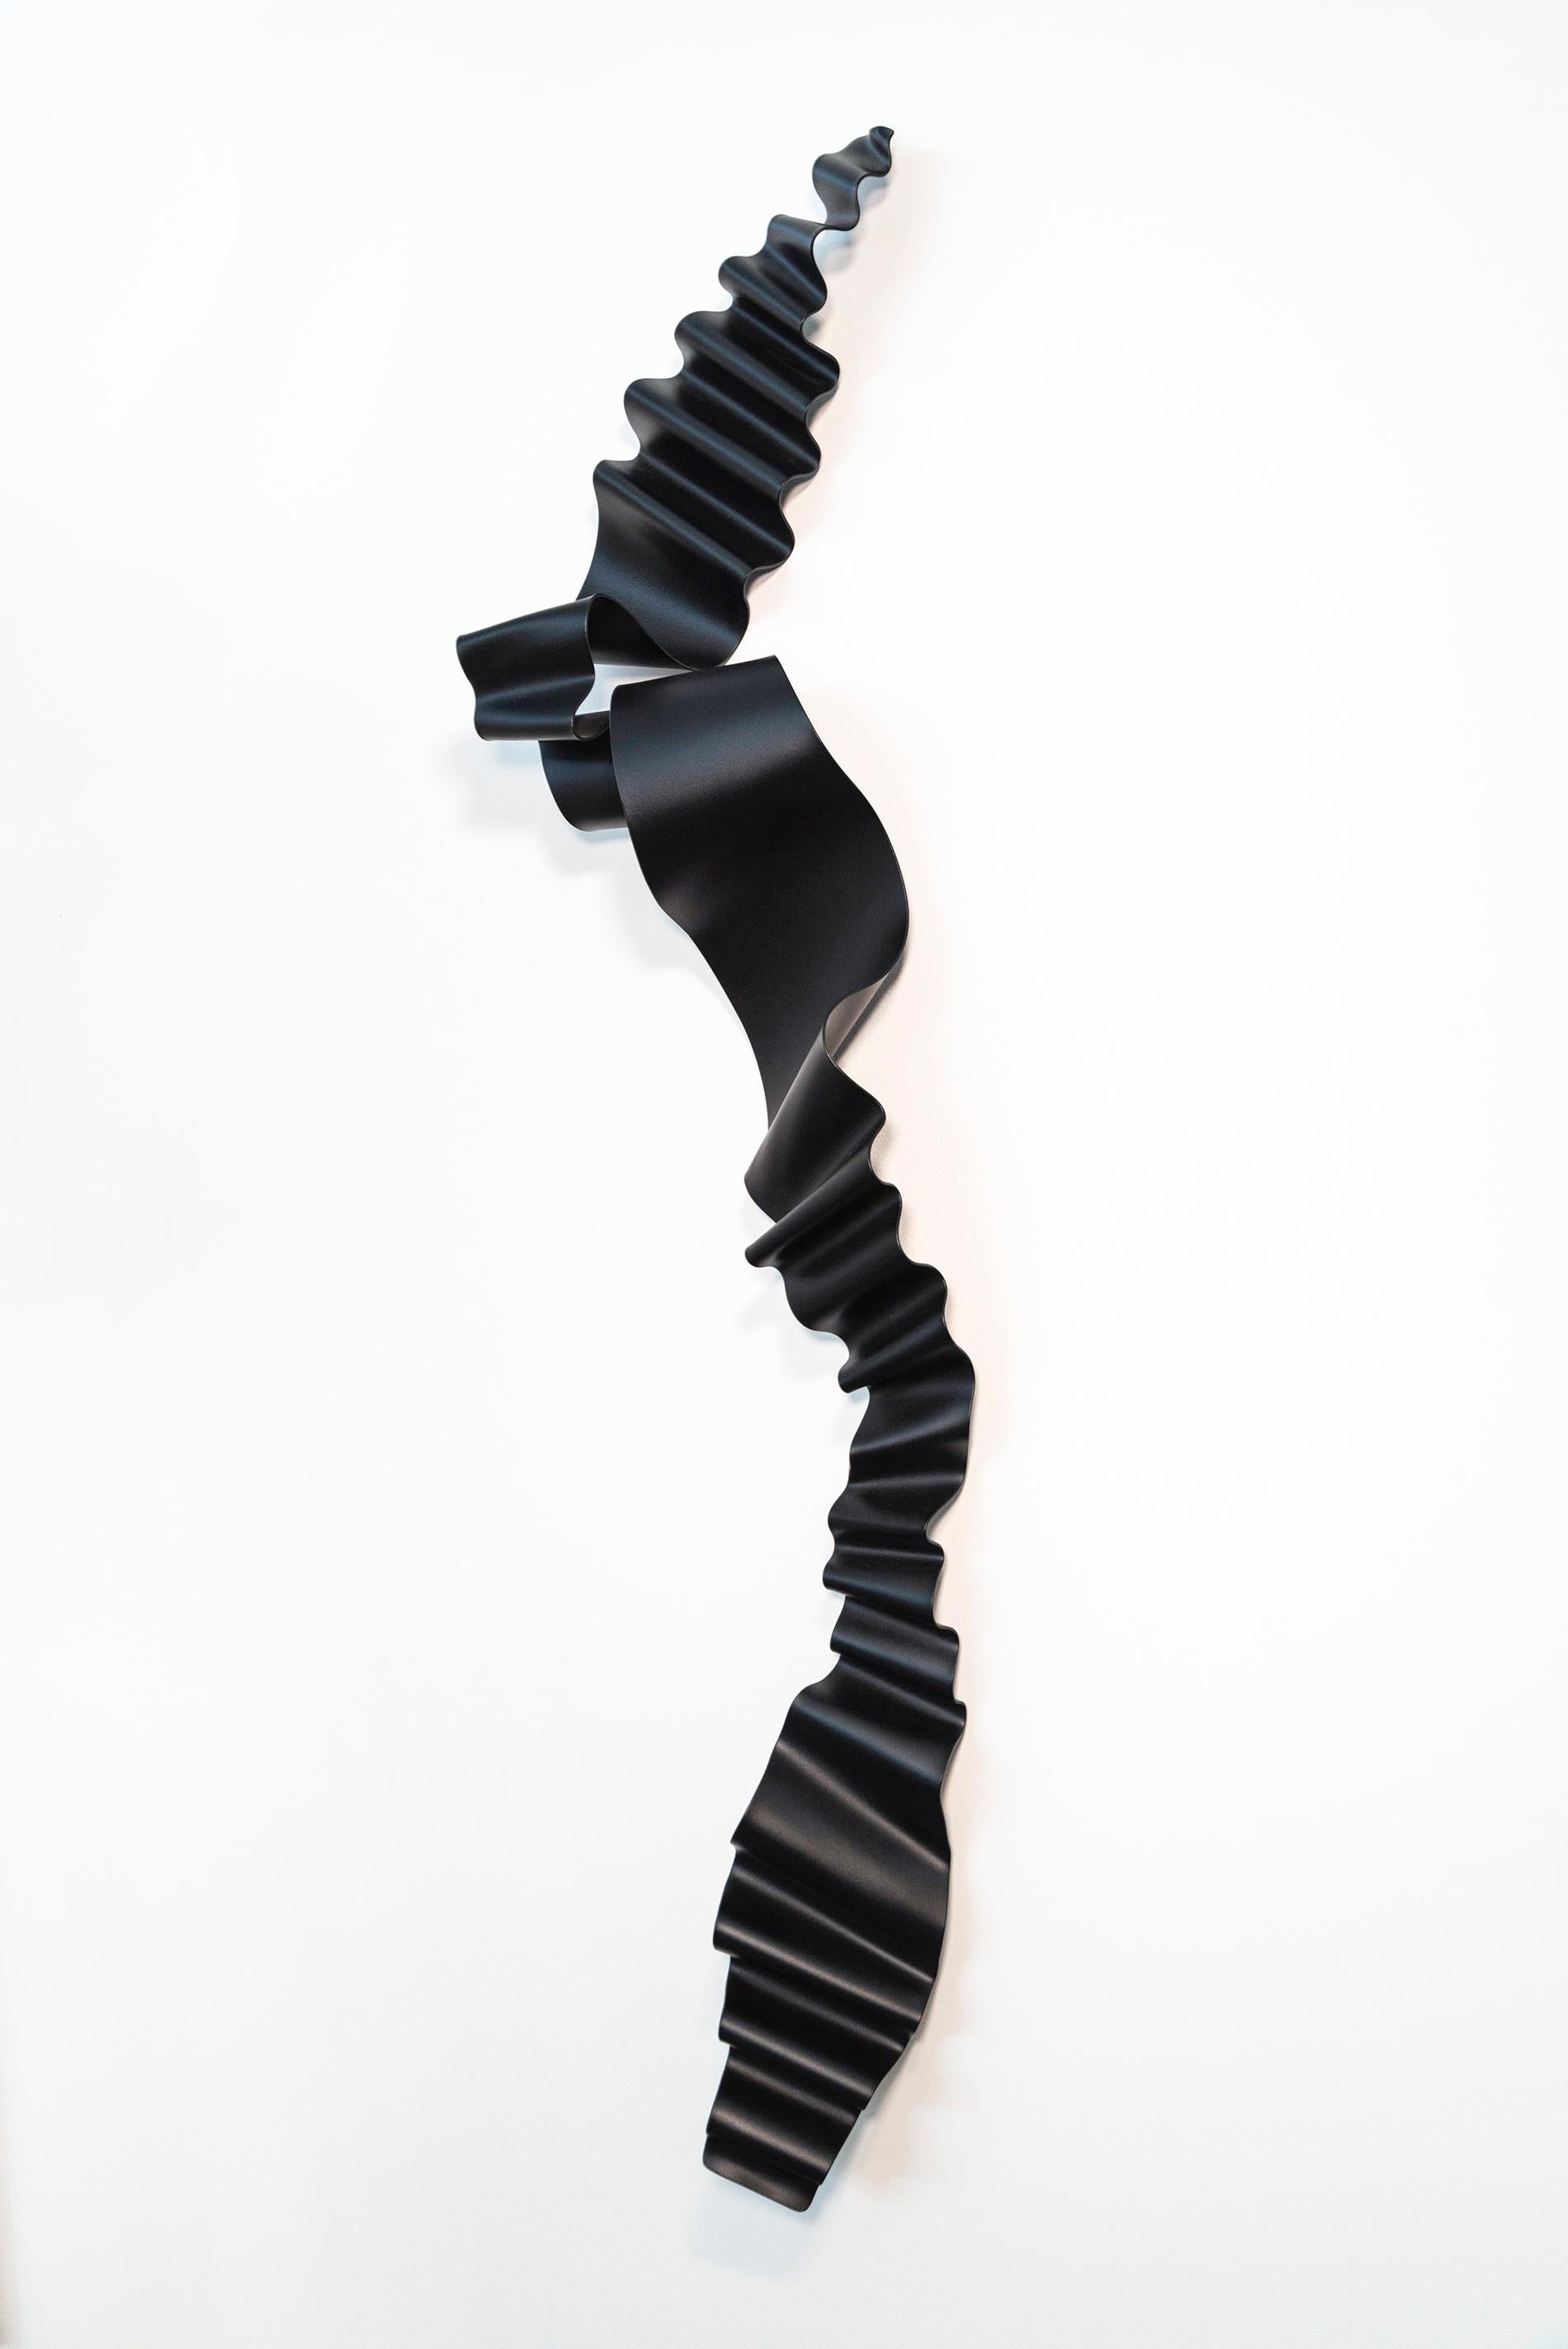 Sword of No Sword 1 - black, ribbon, powder coated steel, wall sculpture For Sale 1